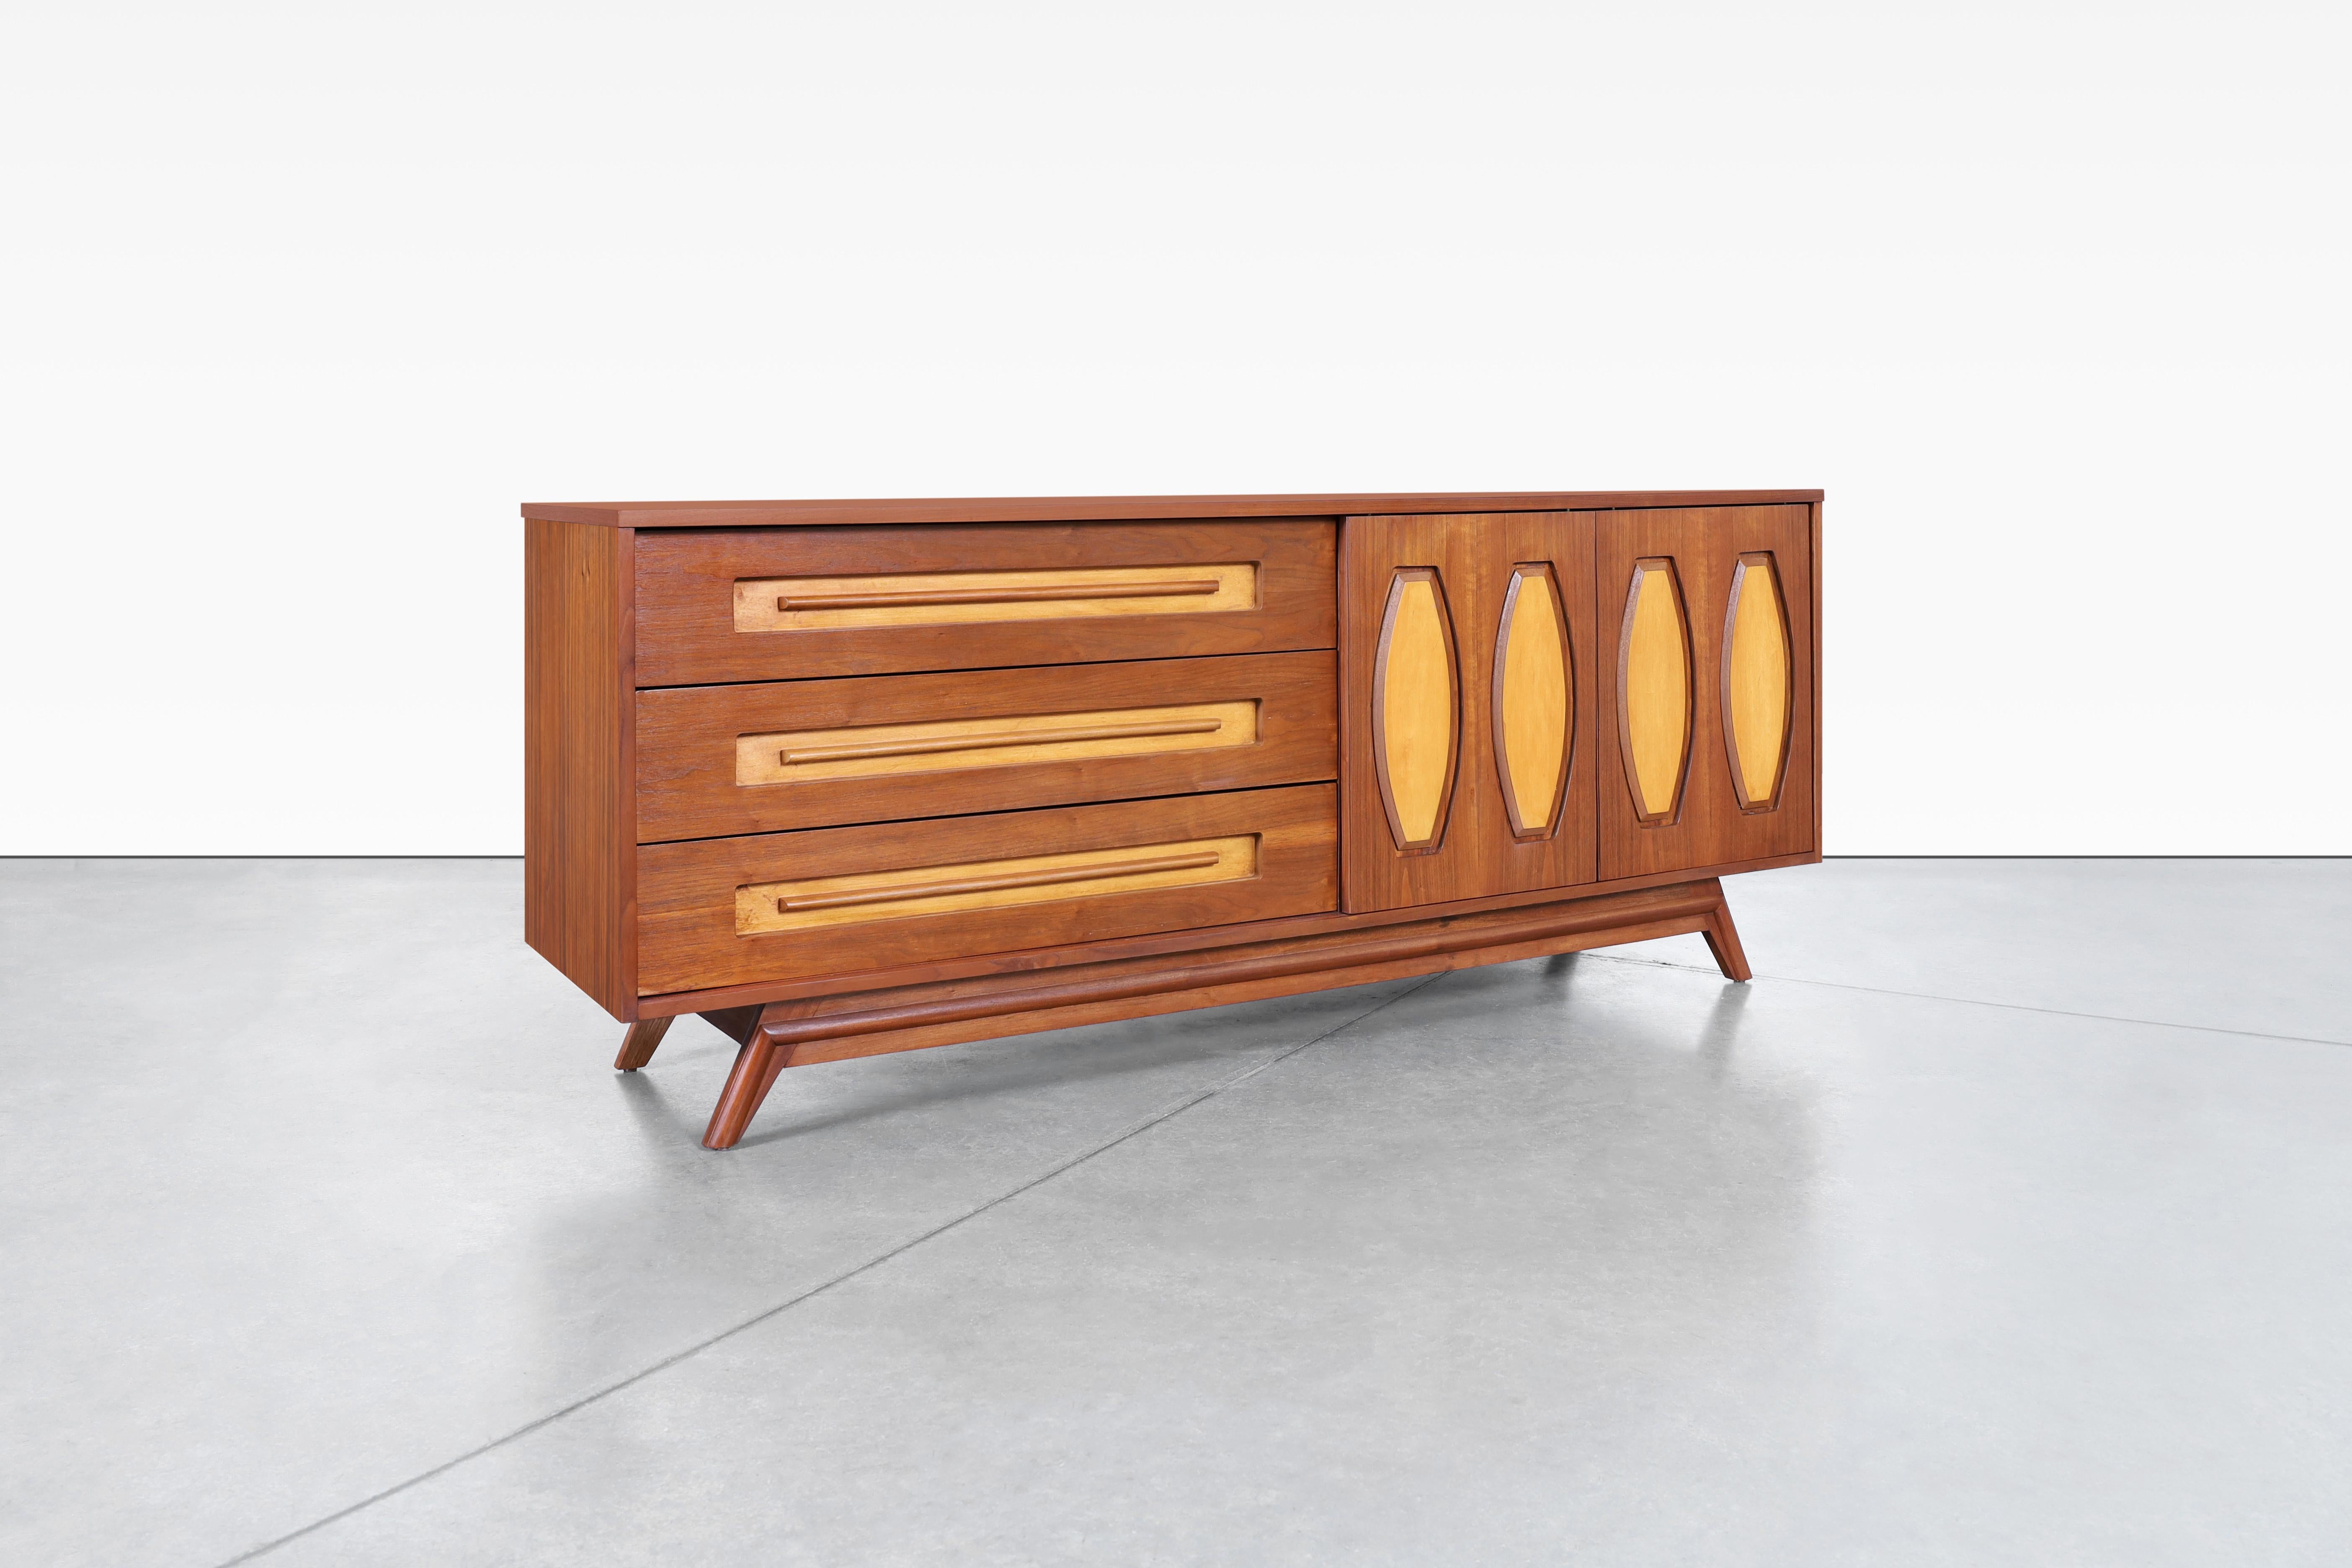 Introducing a stunning mid-century dresser designed by Young Manufacturing in the United States during the 1960s. This credenza is truly an exceptional piece from the finest quality walnut wood and birch; the natural grain patterns of the wood